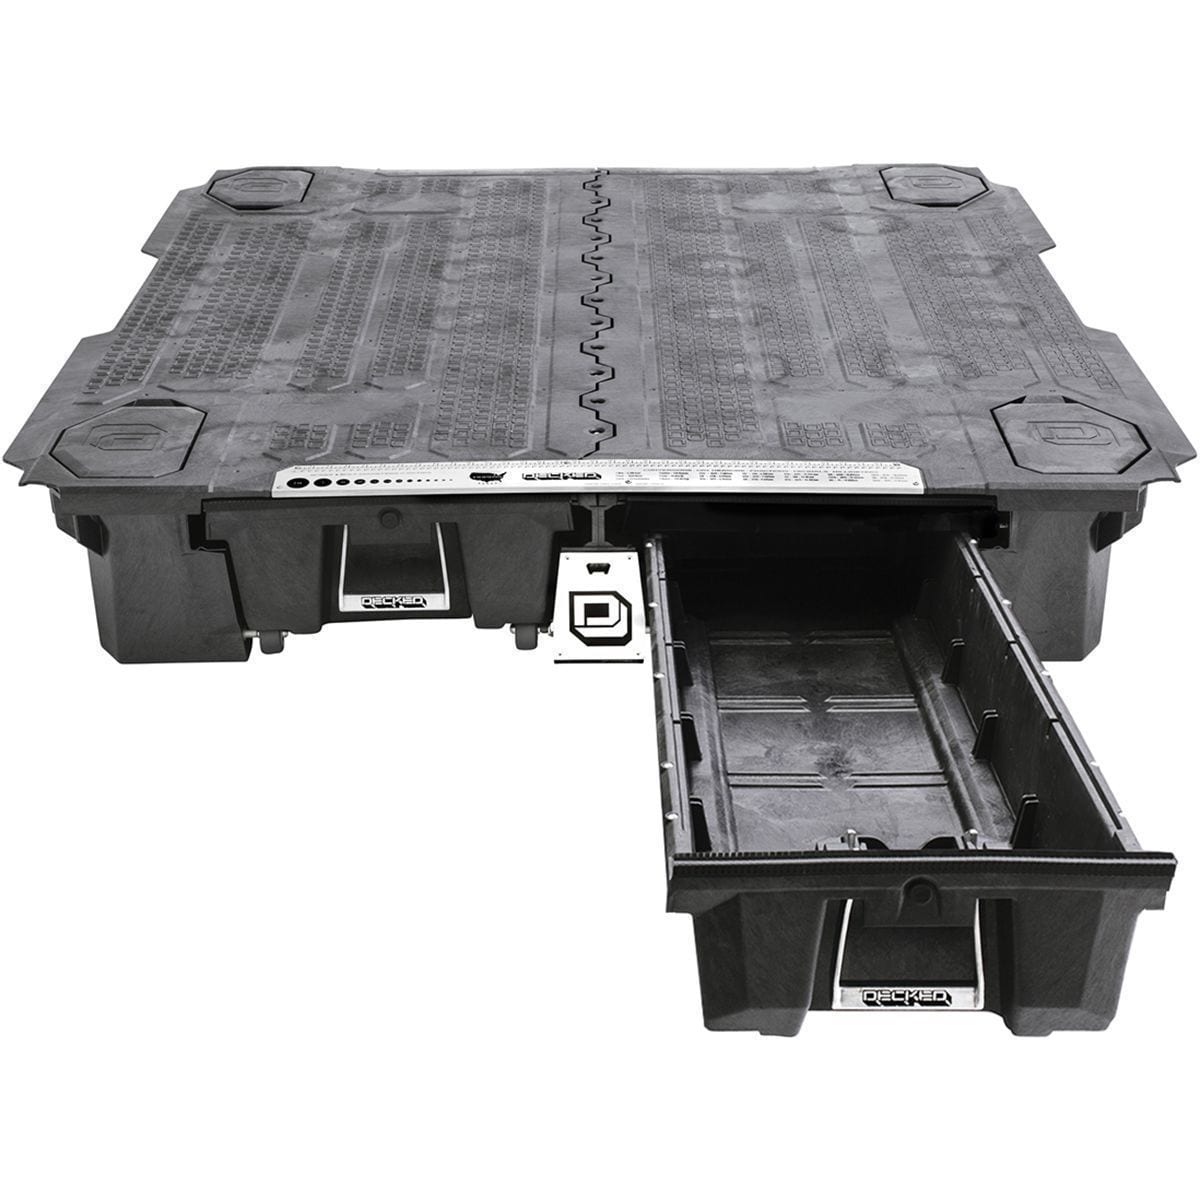 Decked Nissan Truck Bed System